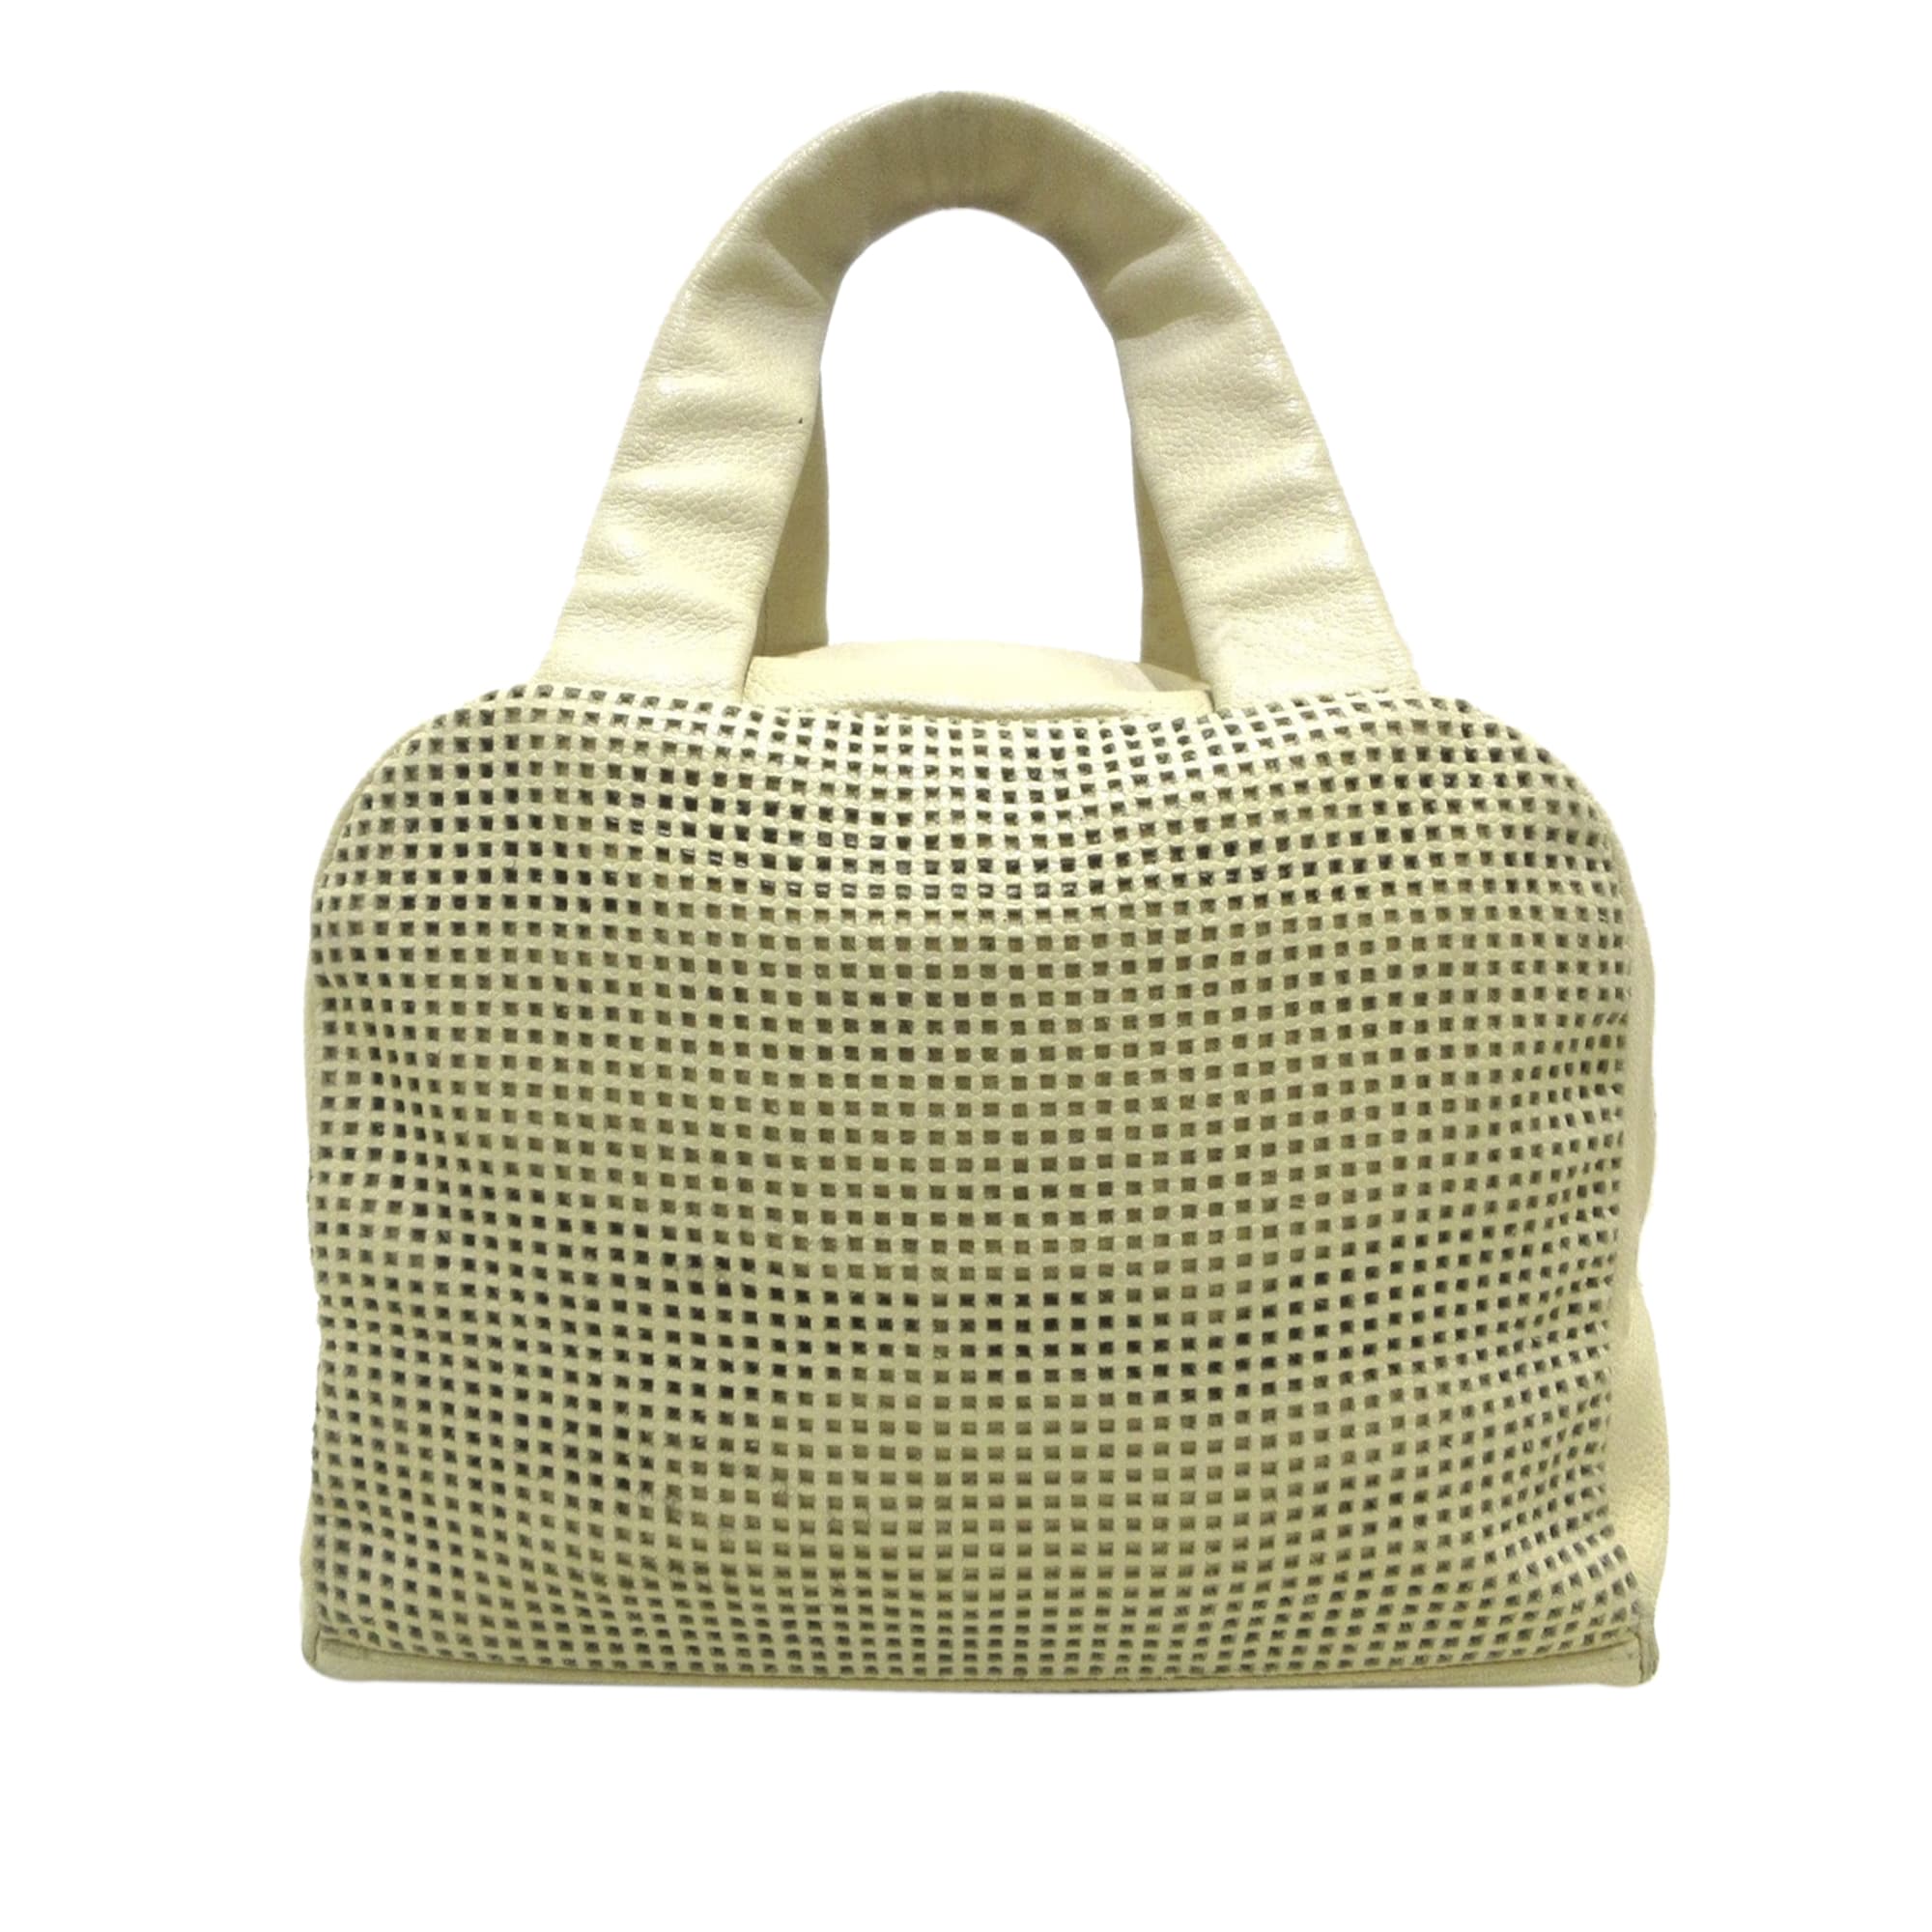 Chanel Vintage Perforated Cc Bowler, ONESIZE